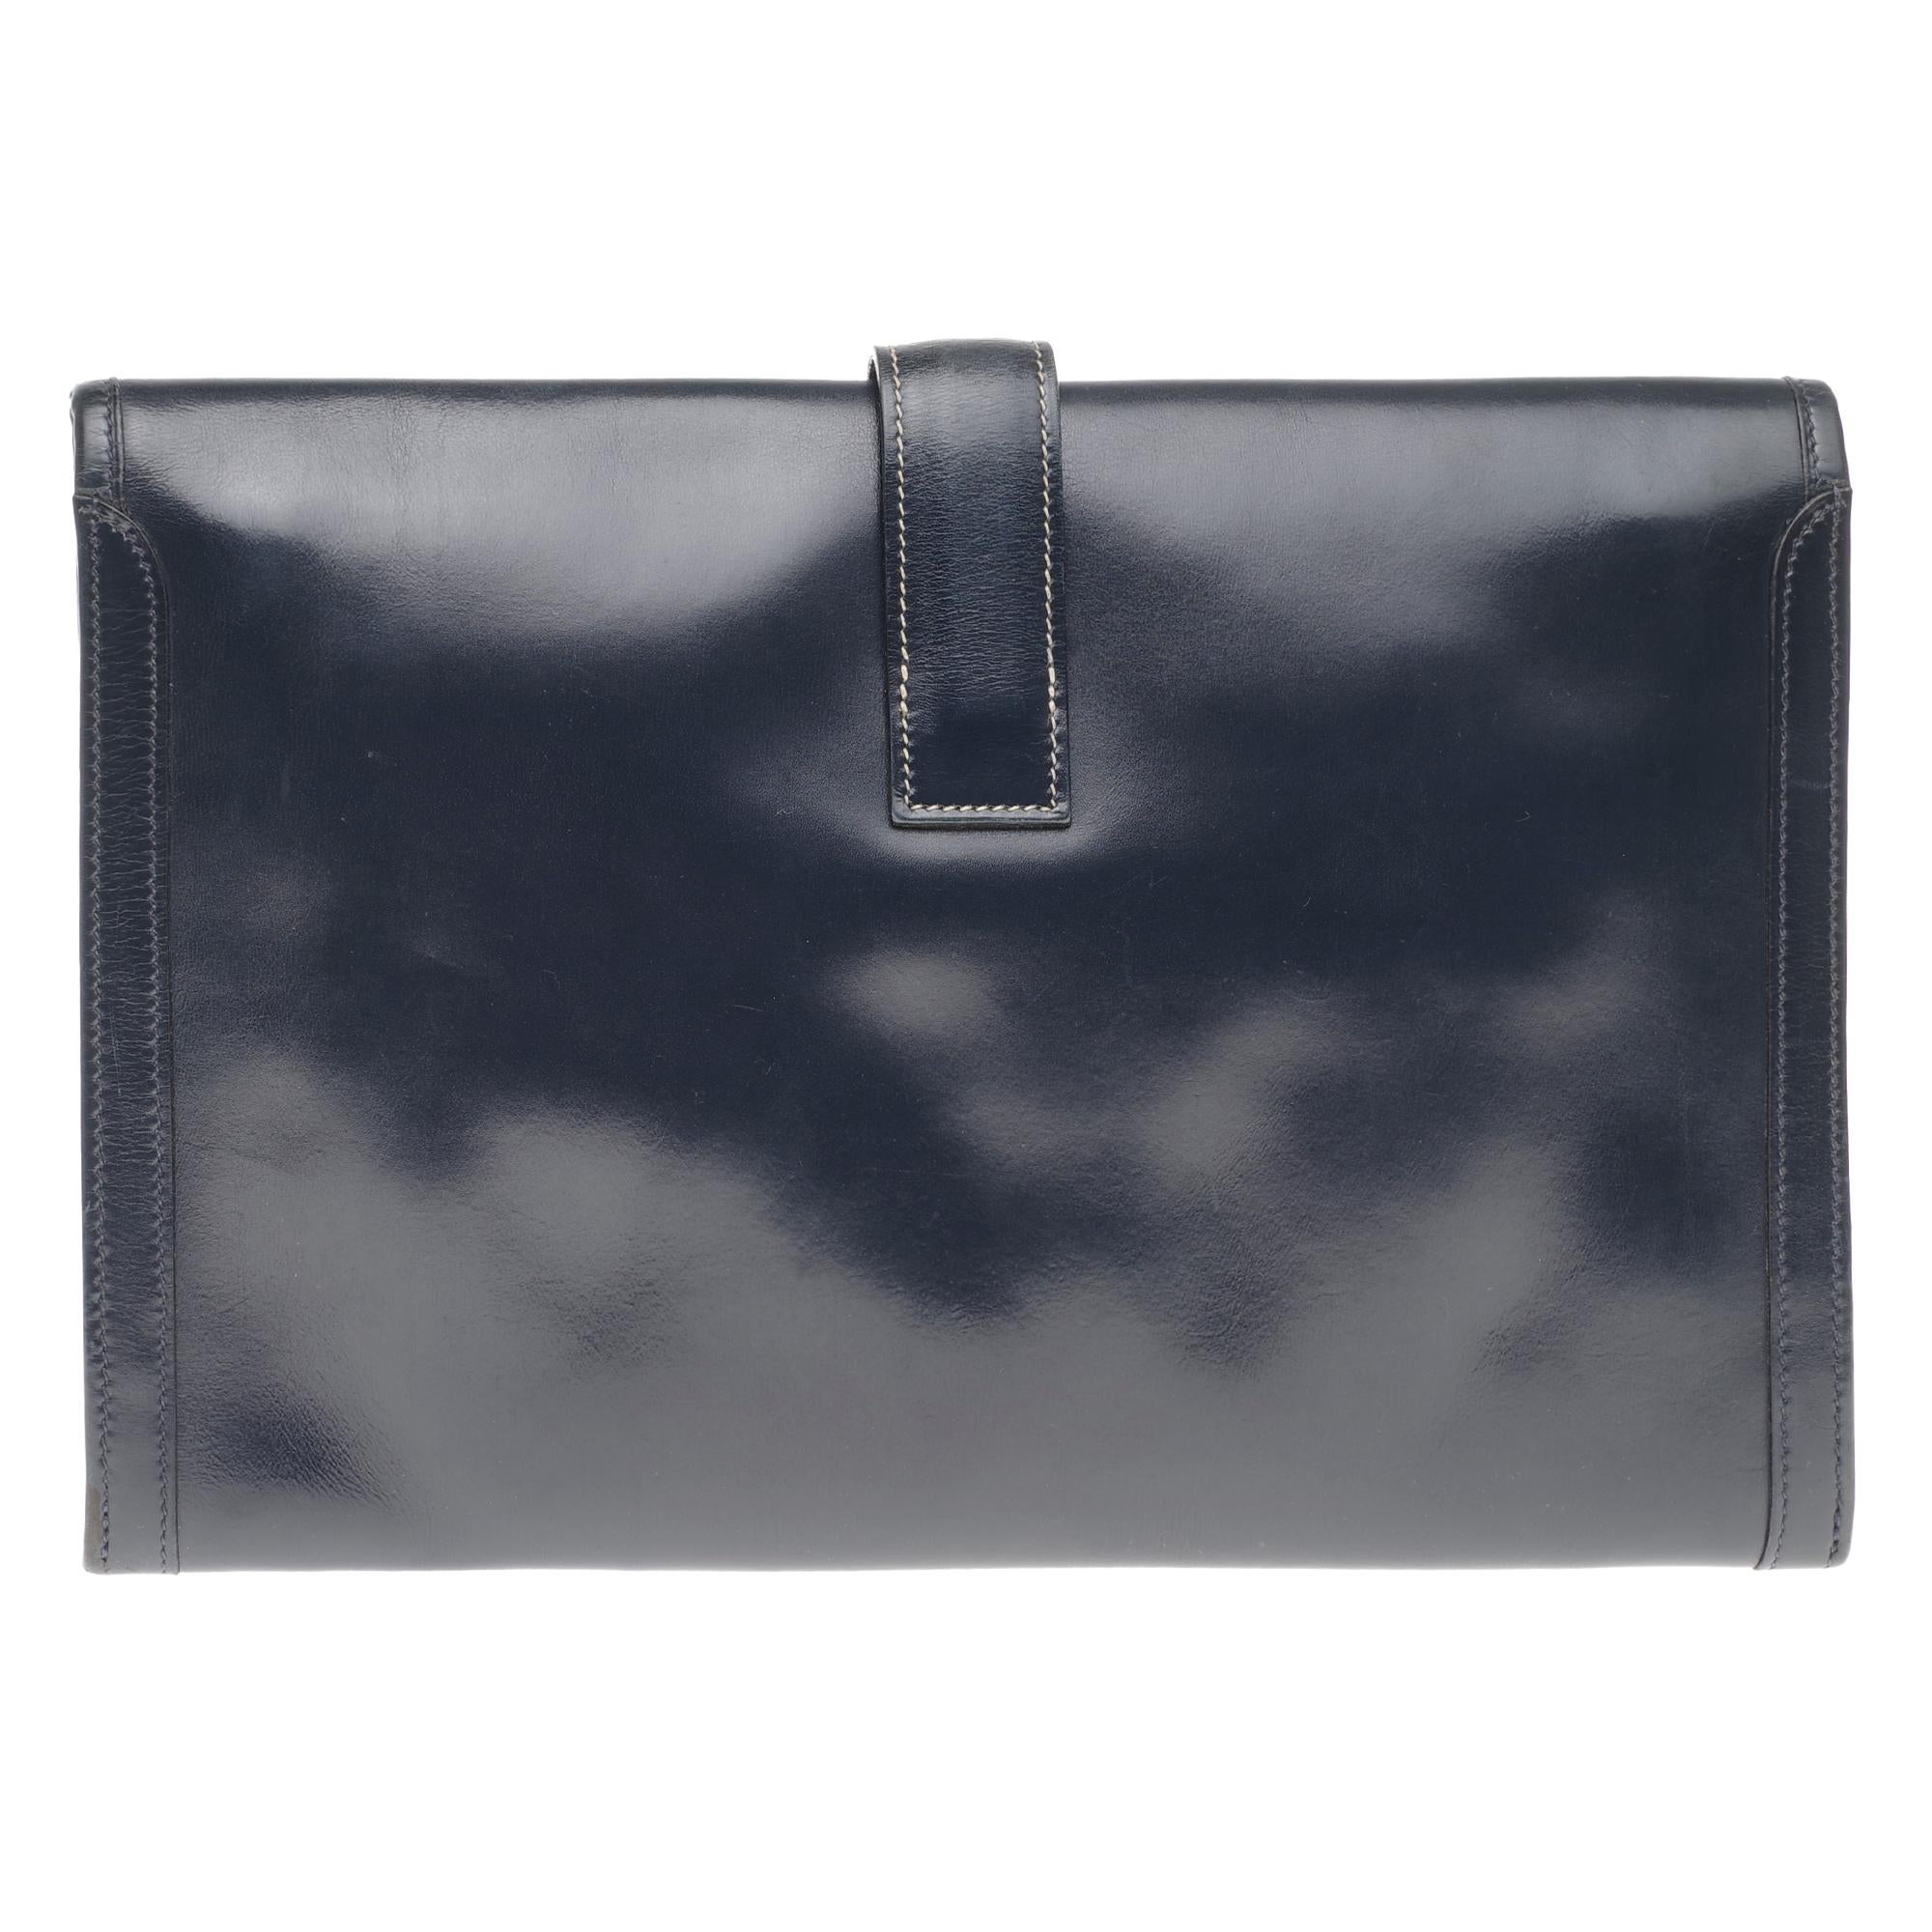 Beautiful clutch Hermes Jige in navy blue box leather, white stitching, handmade.

Closure H on flap.
Interior lining in beige canvas.
Signature: 